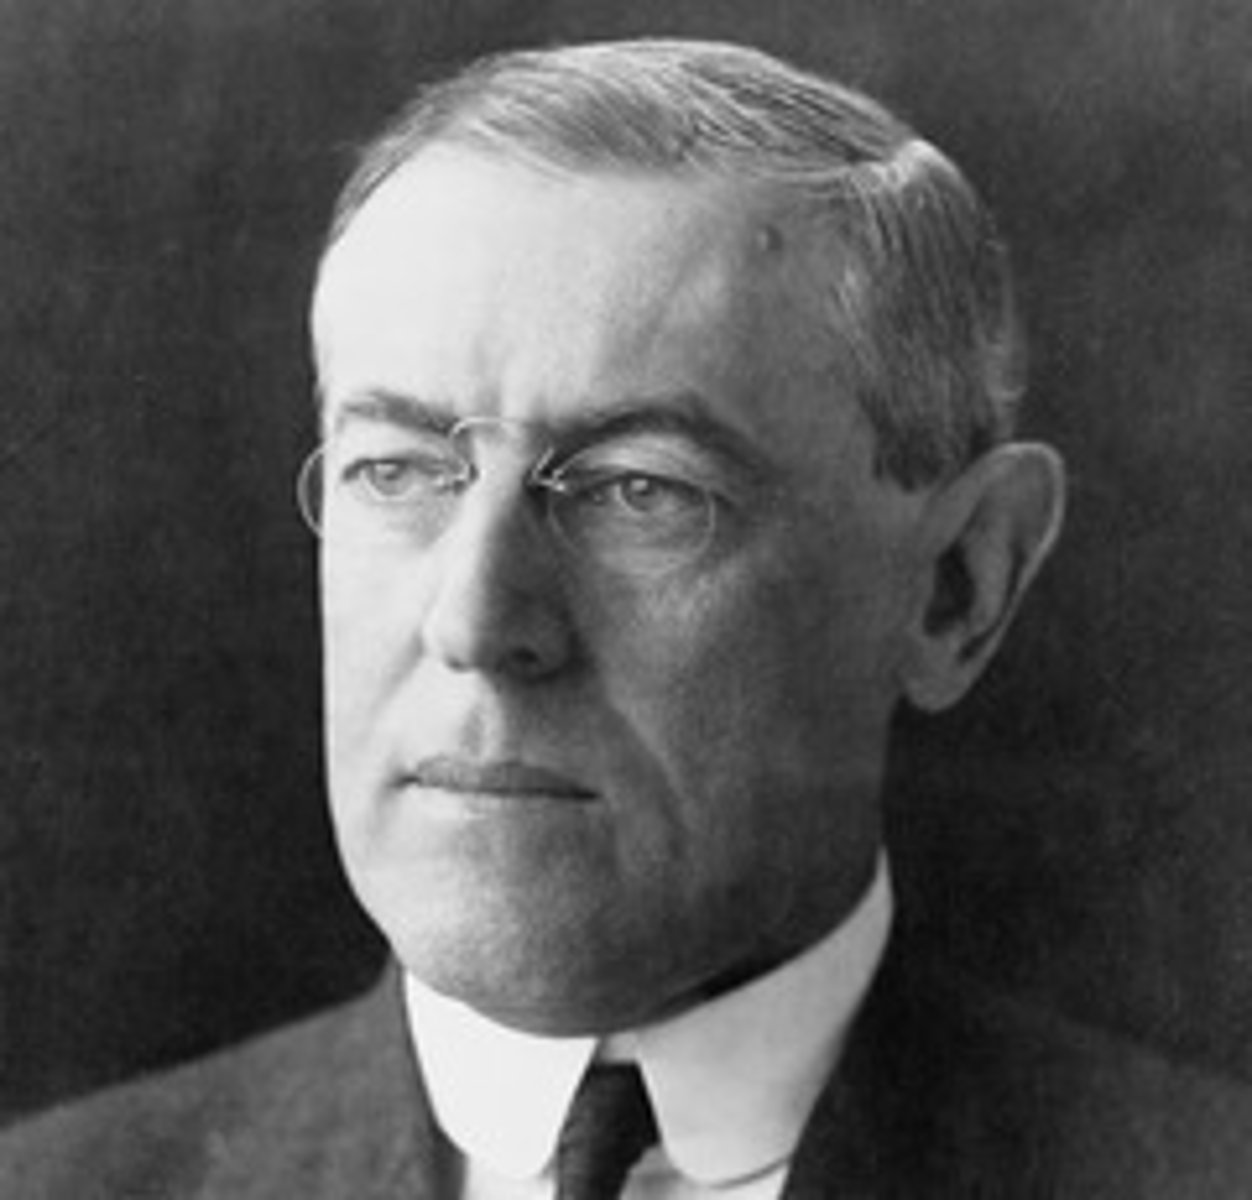 <p>Foreign policy proposed by President Wilson to condemn imperialism, spread democracy, and promote peace</p>